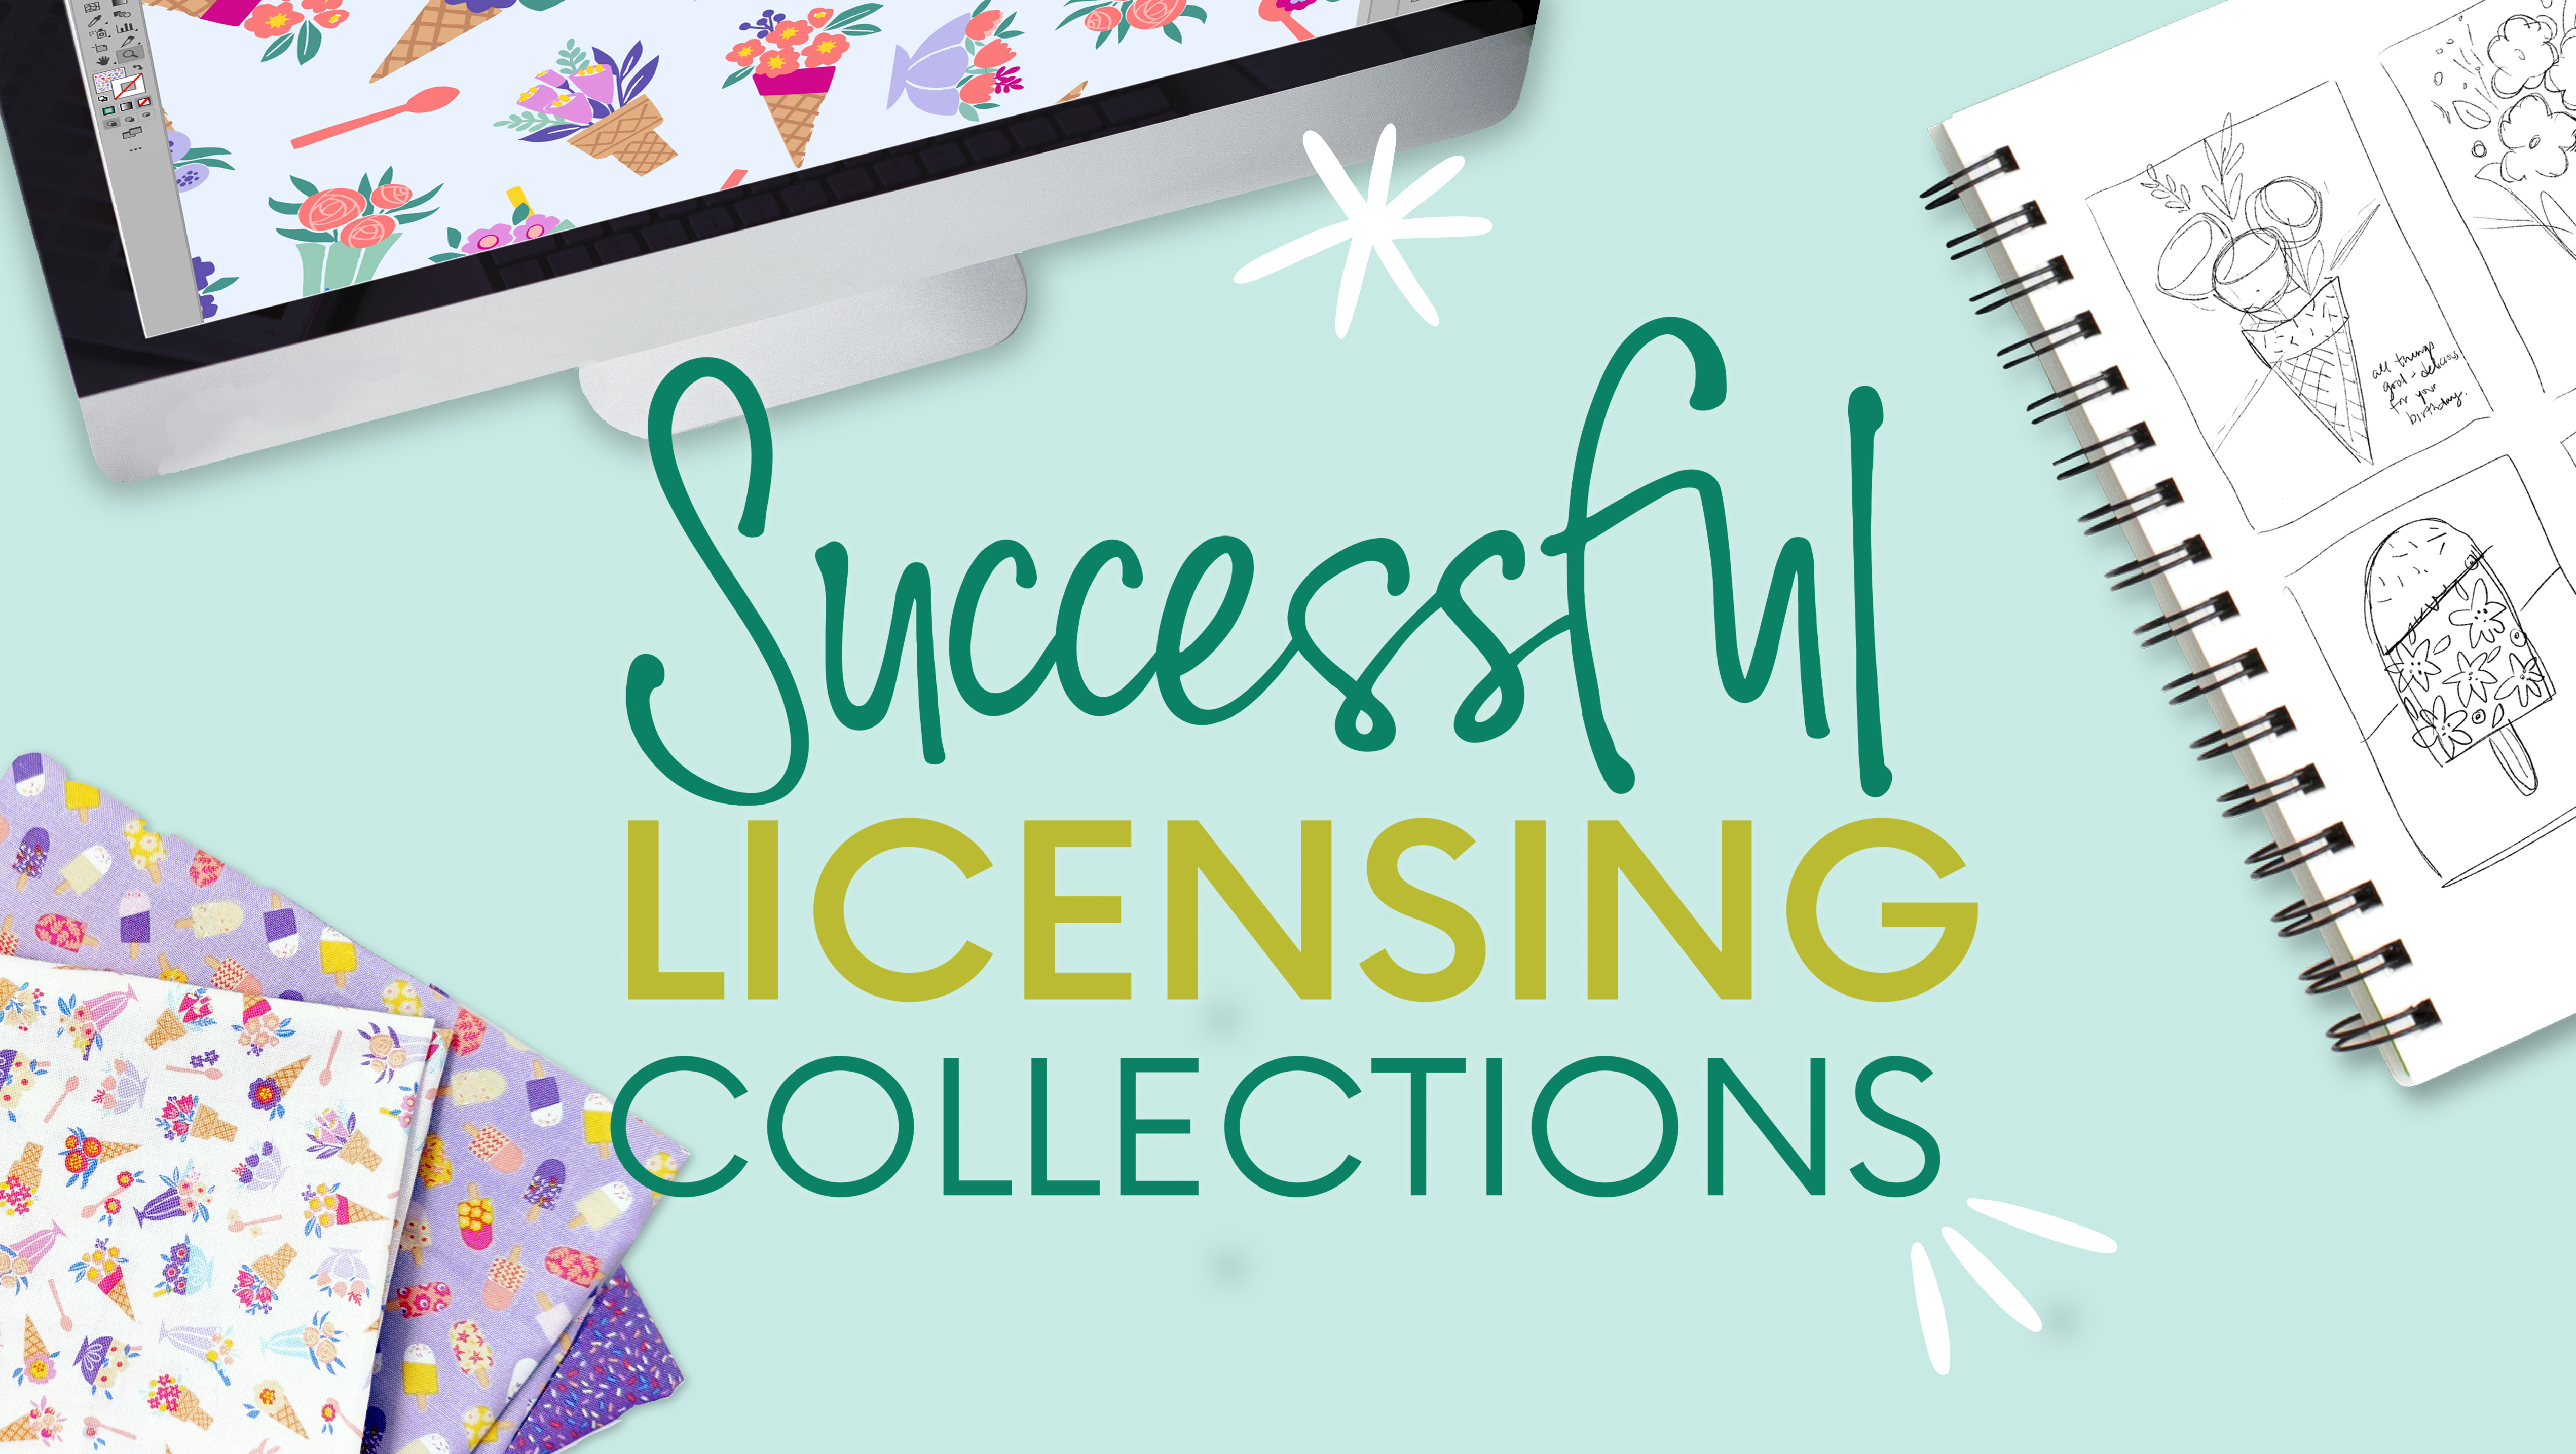 Create Successful Art Licensing Collections